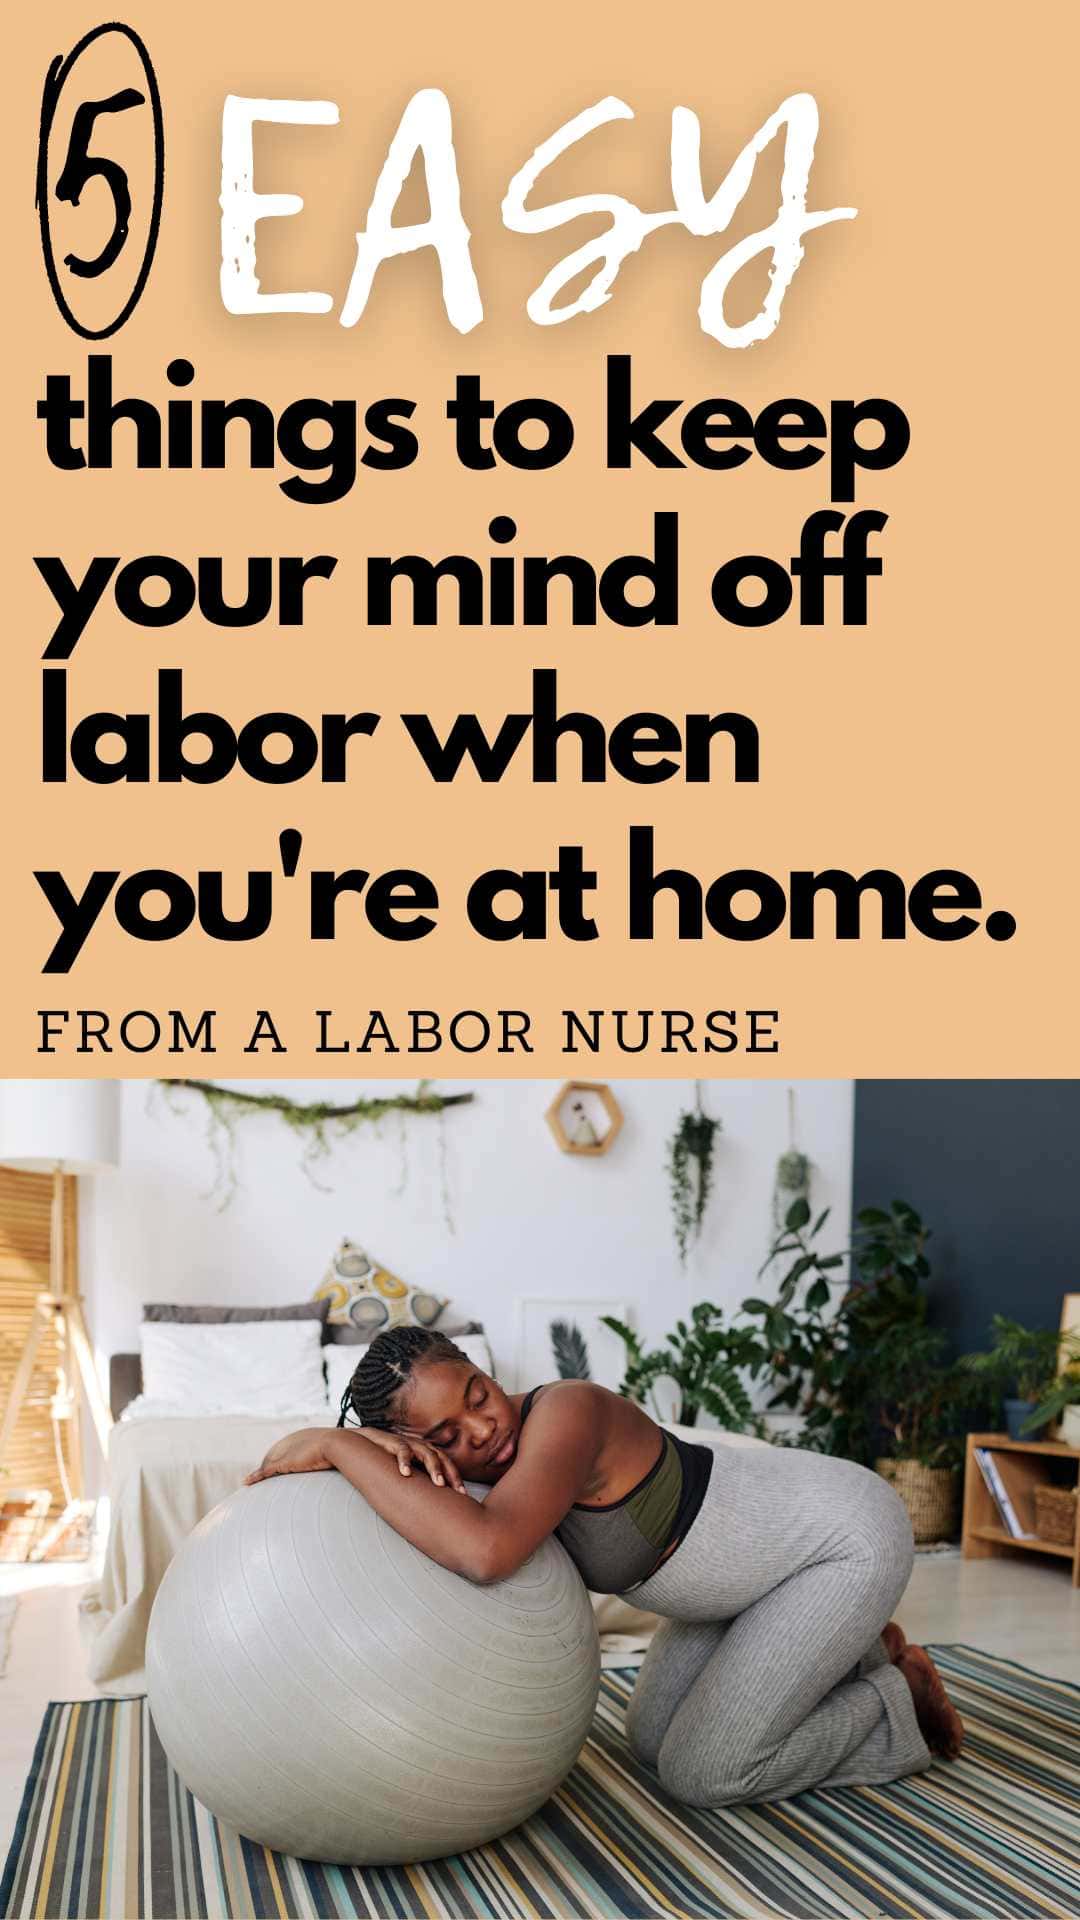 "5 Things To Do While in Labor at Home: A helpful guide for expectant mothers. Get tips on how to make the most of early labor at home, including sleeping, changing positions, cooking, watching TV, and dancing. Discover how these activities can distract from the pain and keep you active. Learn about the importance of adding music, cleaning (especially the bathroom), eating balanced snacks, and staying hydrated. Plus, find out how partners can assist during this crucial time. Get expert advice from a nurse and mother of three on The Pulling Curls Podcast, where pregnancy and parenting are untangled. #pregnancy #parenting #laborathome #earlylabor" via @pullingcurls